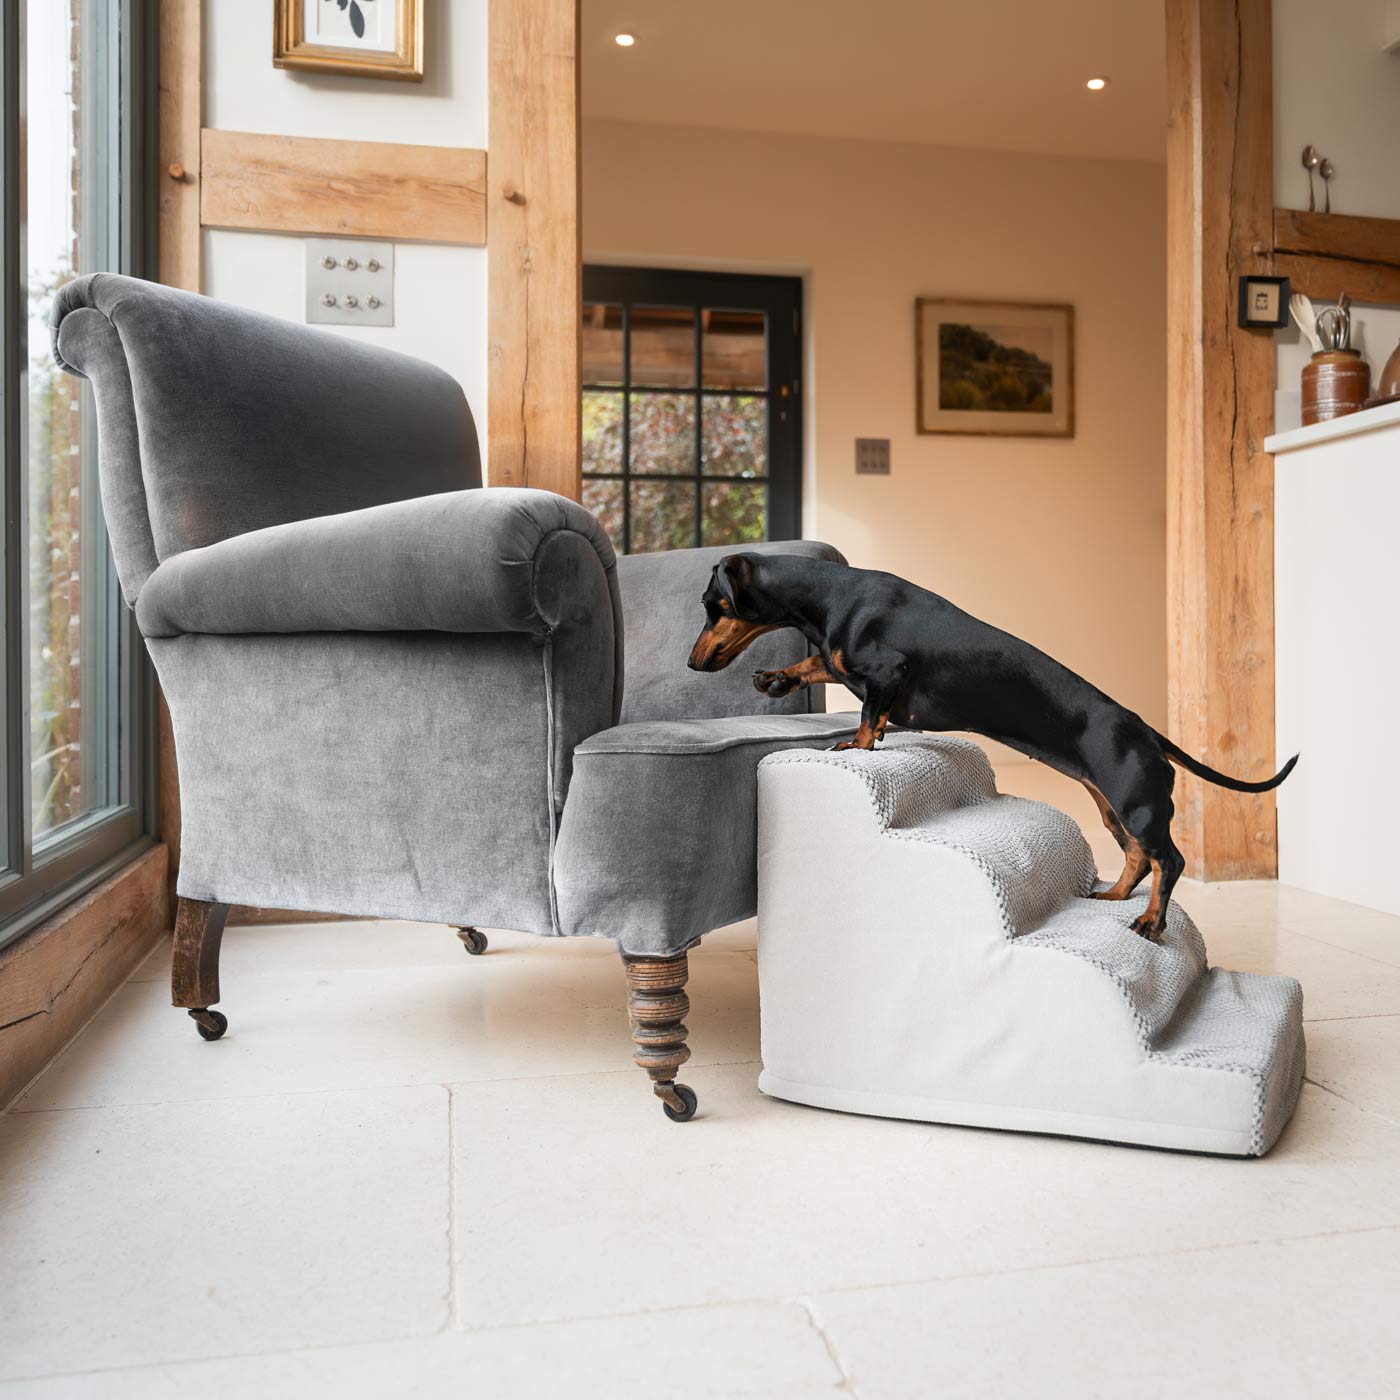 Provide Your Elderly, Young or Injured Pet with The Perfect Pet Furniture Steps, Our Luxury Cloud Pet Steps in Stunning Dove Grey Is the Ideal Choice for Dogs & Cats of All Ages! Pet Steps & Stairs Available Now at Lords & Labradors     